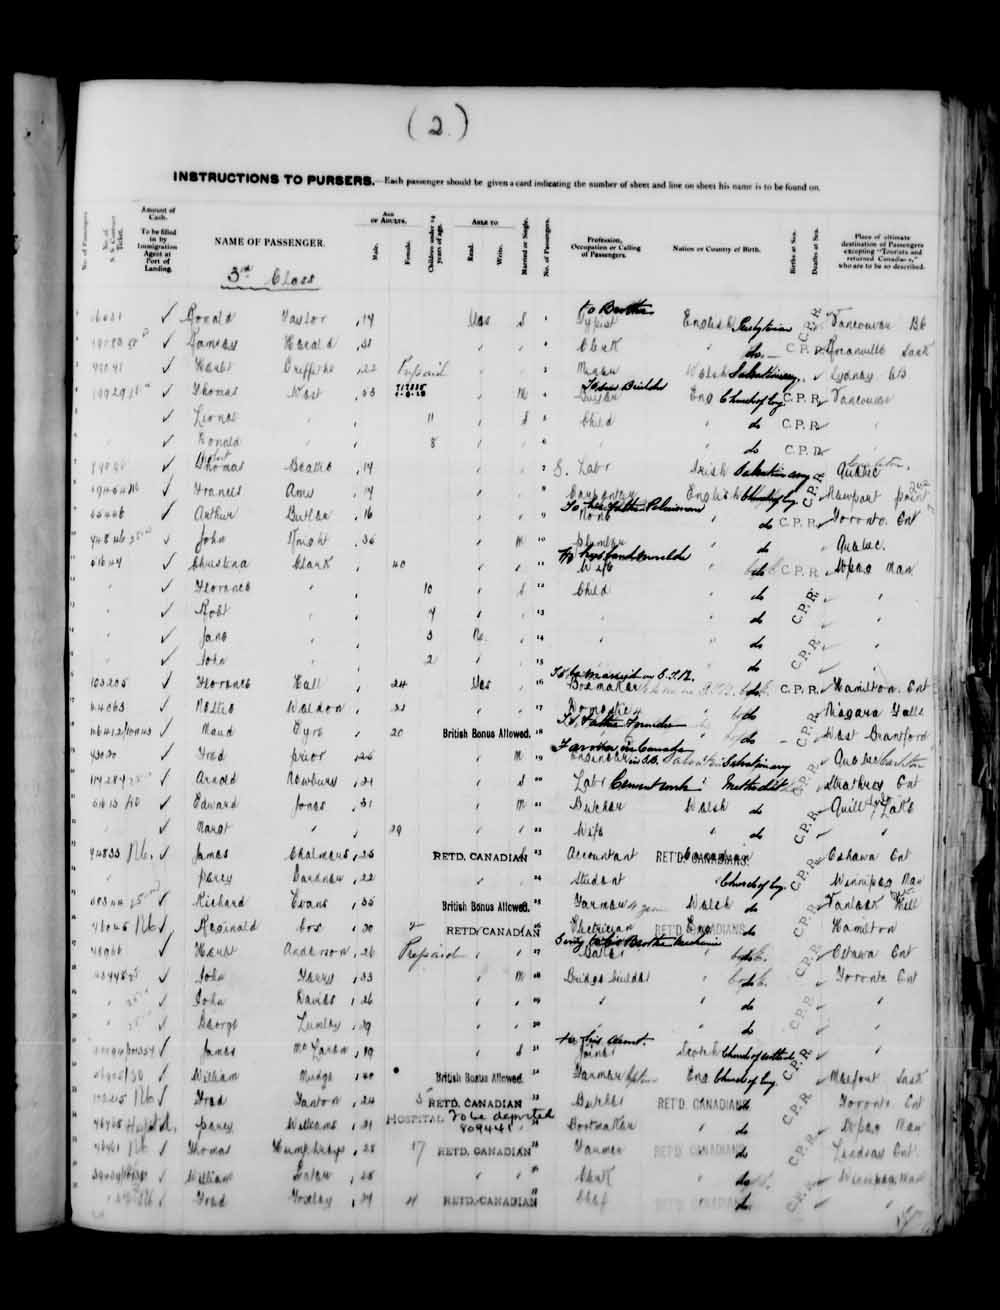 Digitized page of Quebec Passenger Lists for Image No.: e003591573